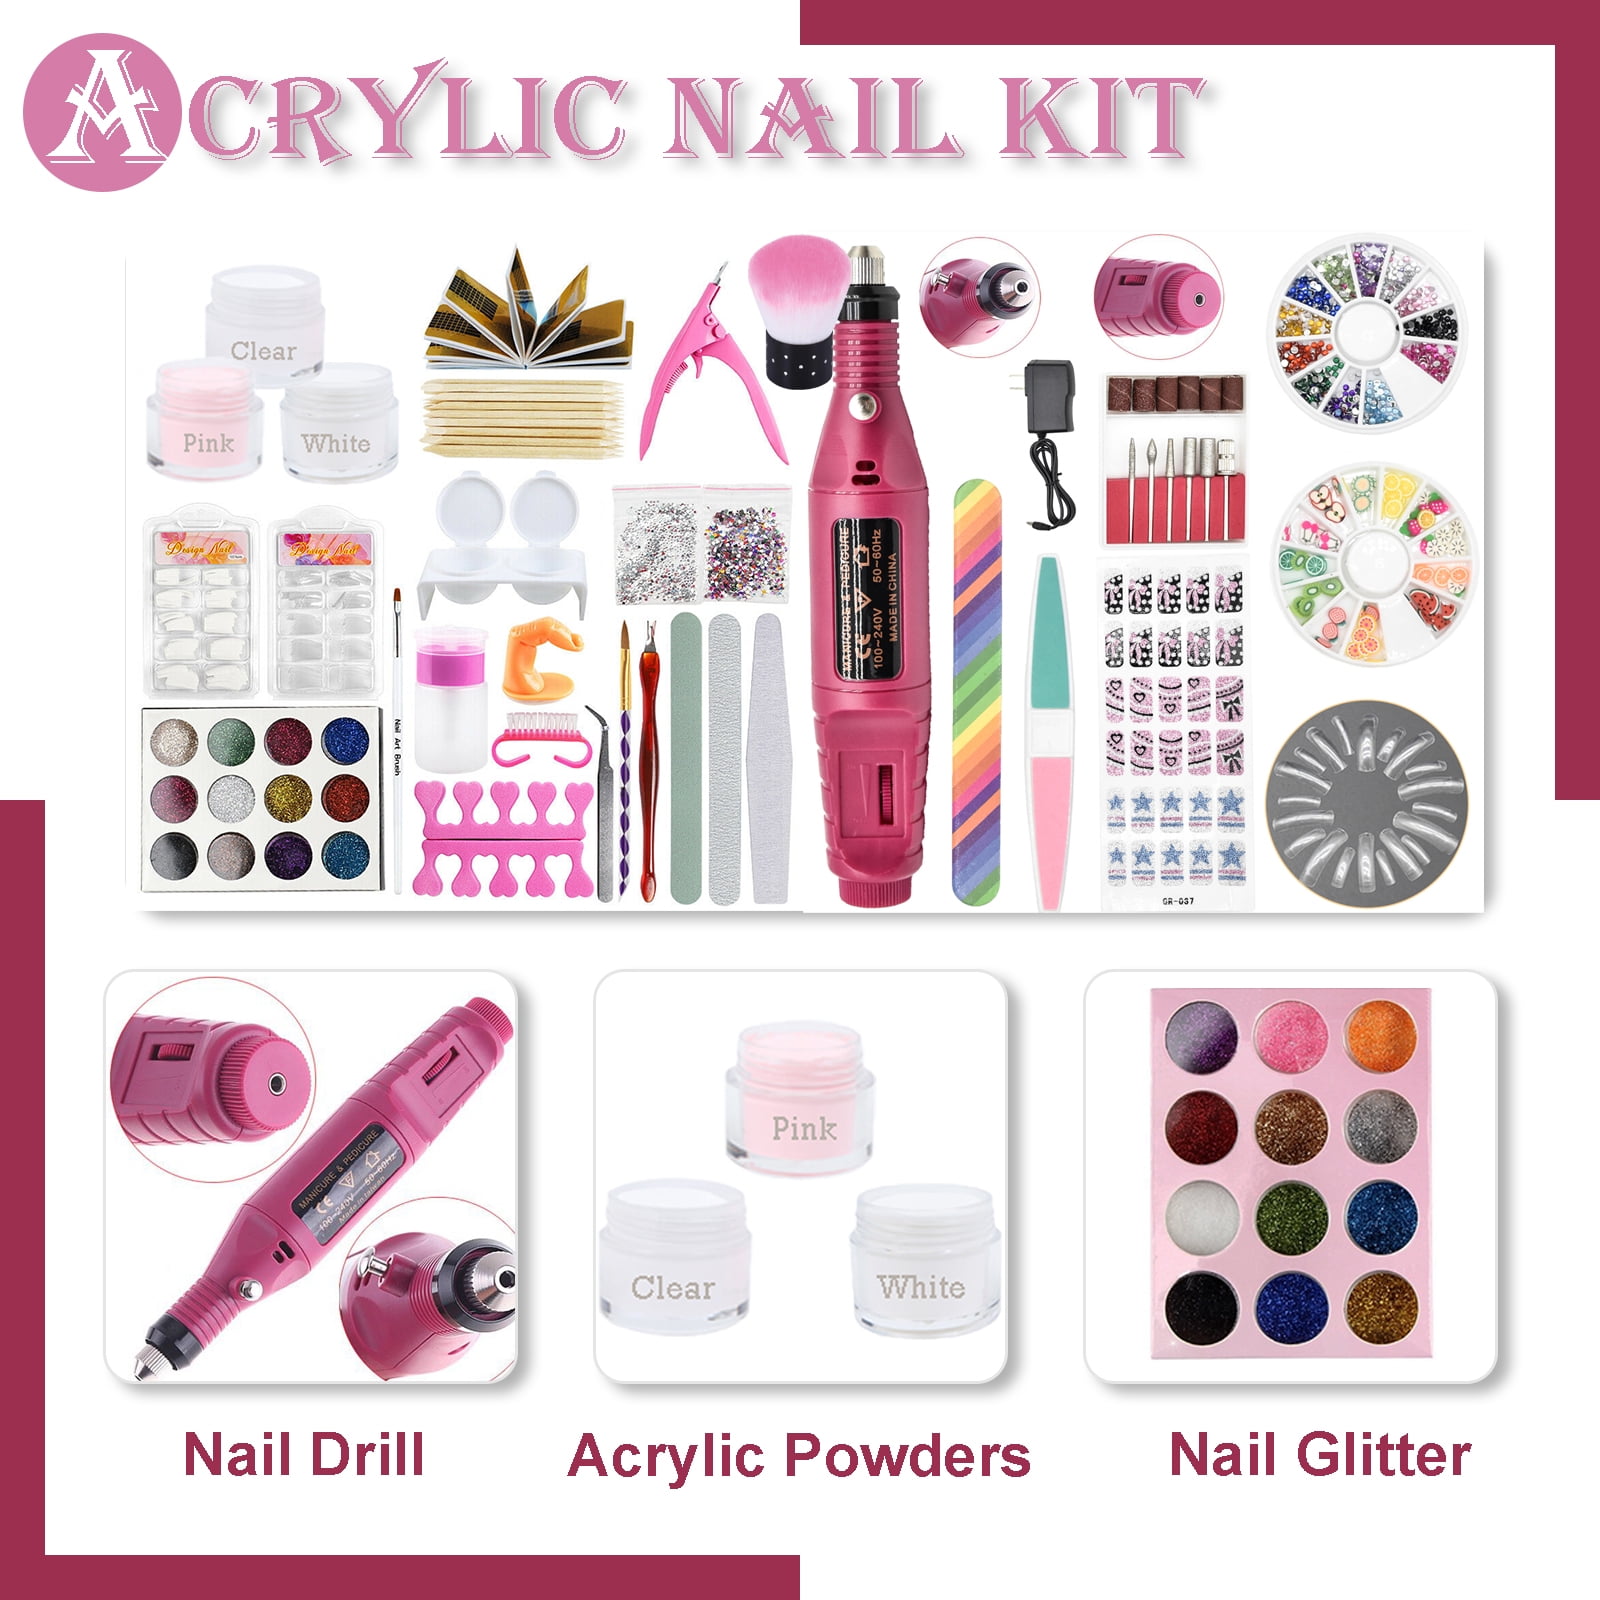 iMeshbean Acrylic Nail Kit For Beginners with Nail Drill Professional Nail Art Acrylic Set for Beginners DIY At Home With Salon Quality Pink 58652502 c5d4 419d 80b1 c1f6ace243e1.32f2544dd0bbfe31a940e2f08dc16cd3